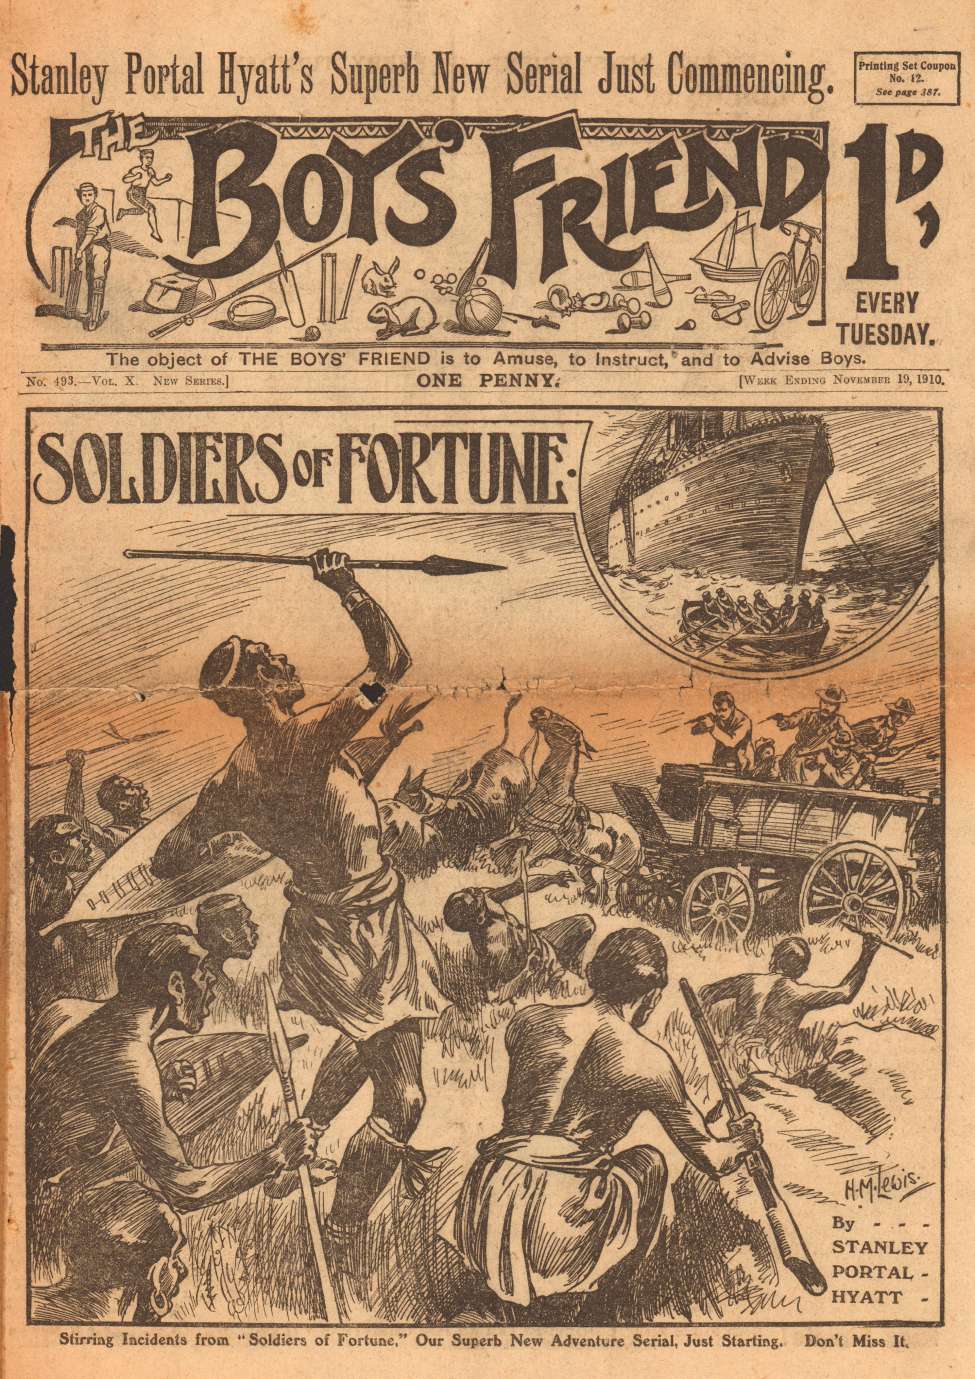 Comic Book Cover For The Boys' Friend 493 - Soldiers of Fortune